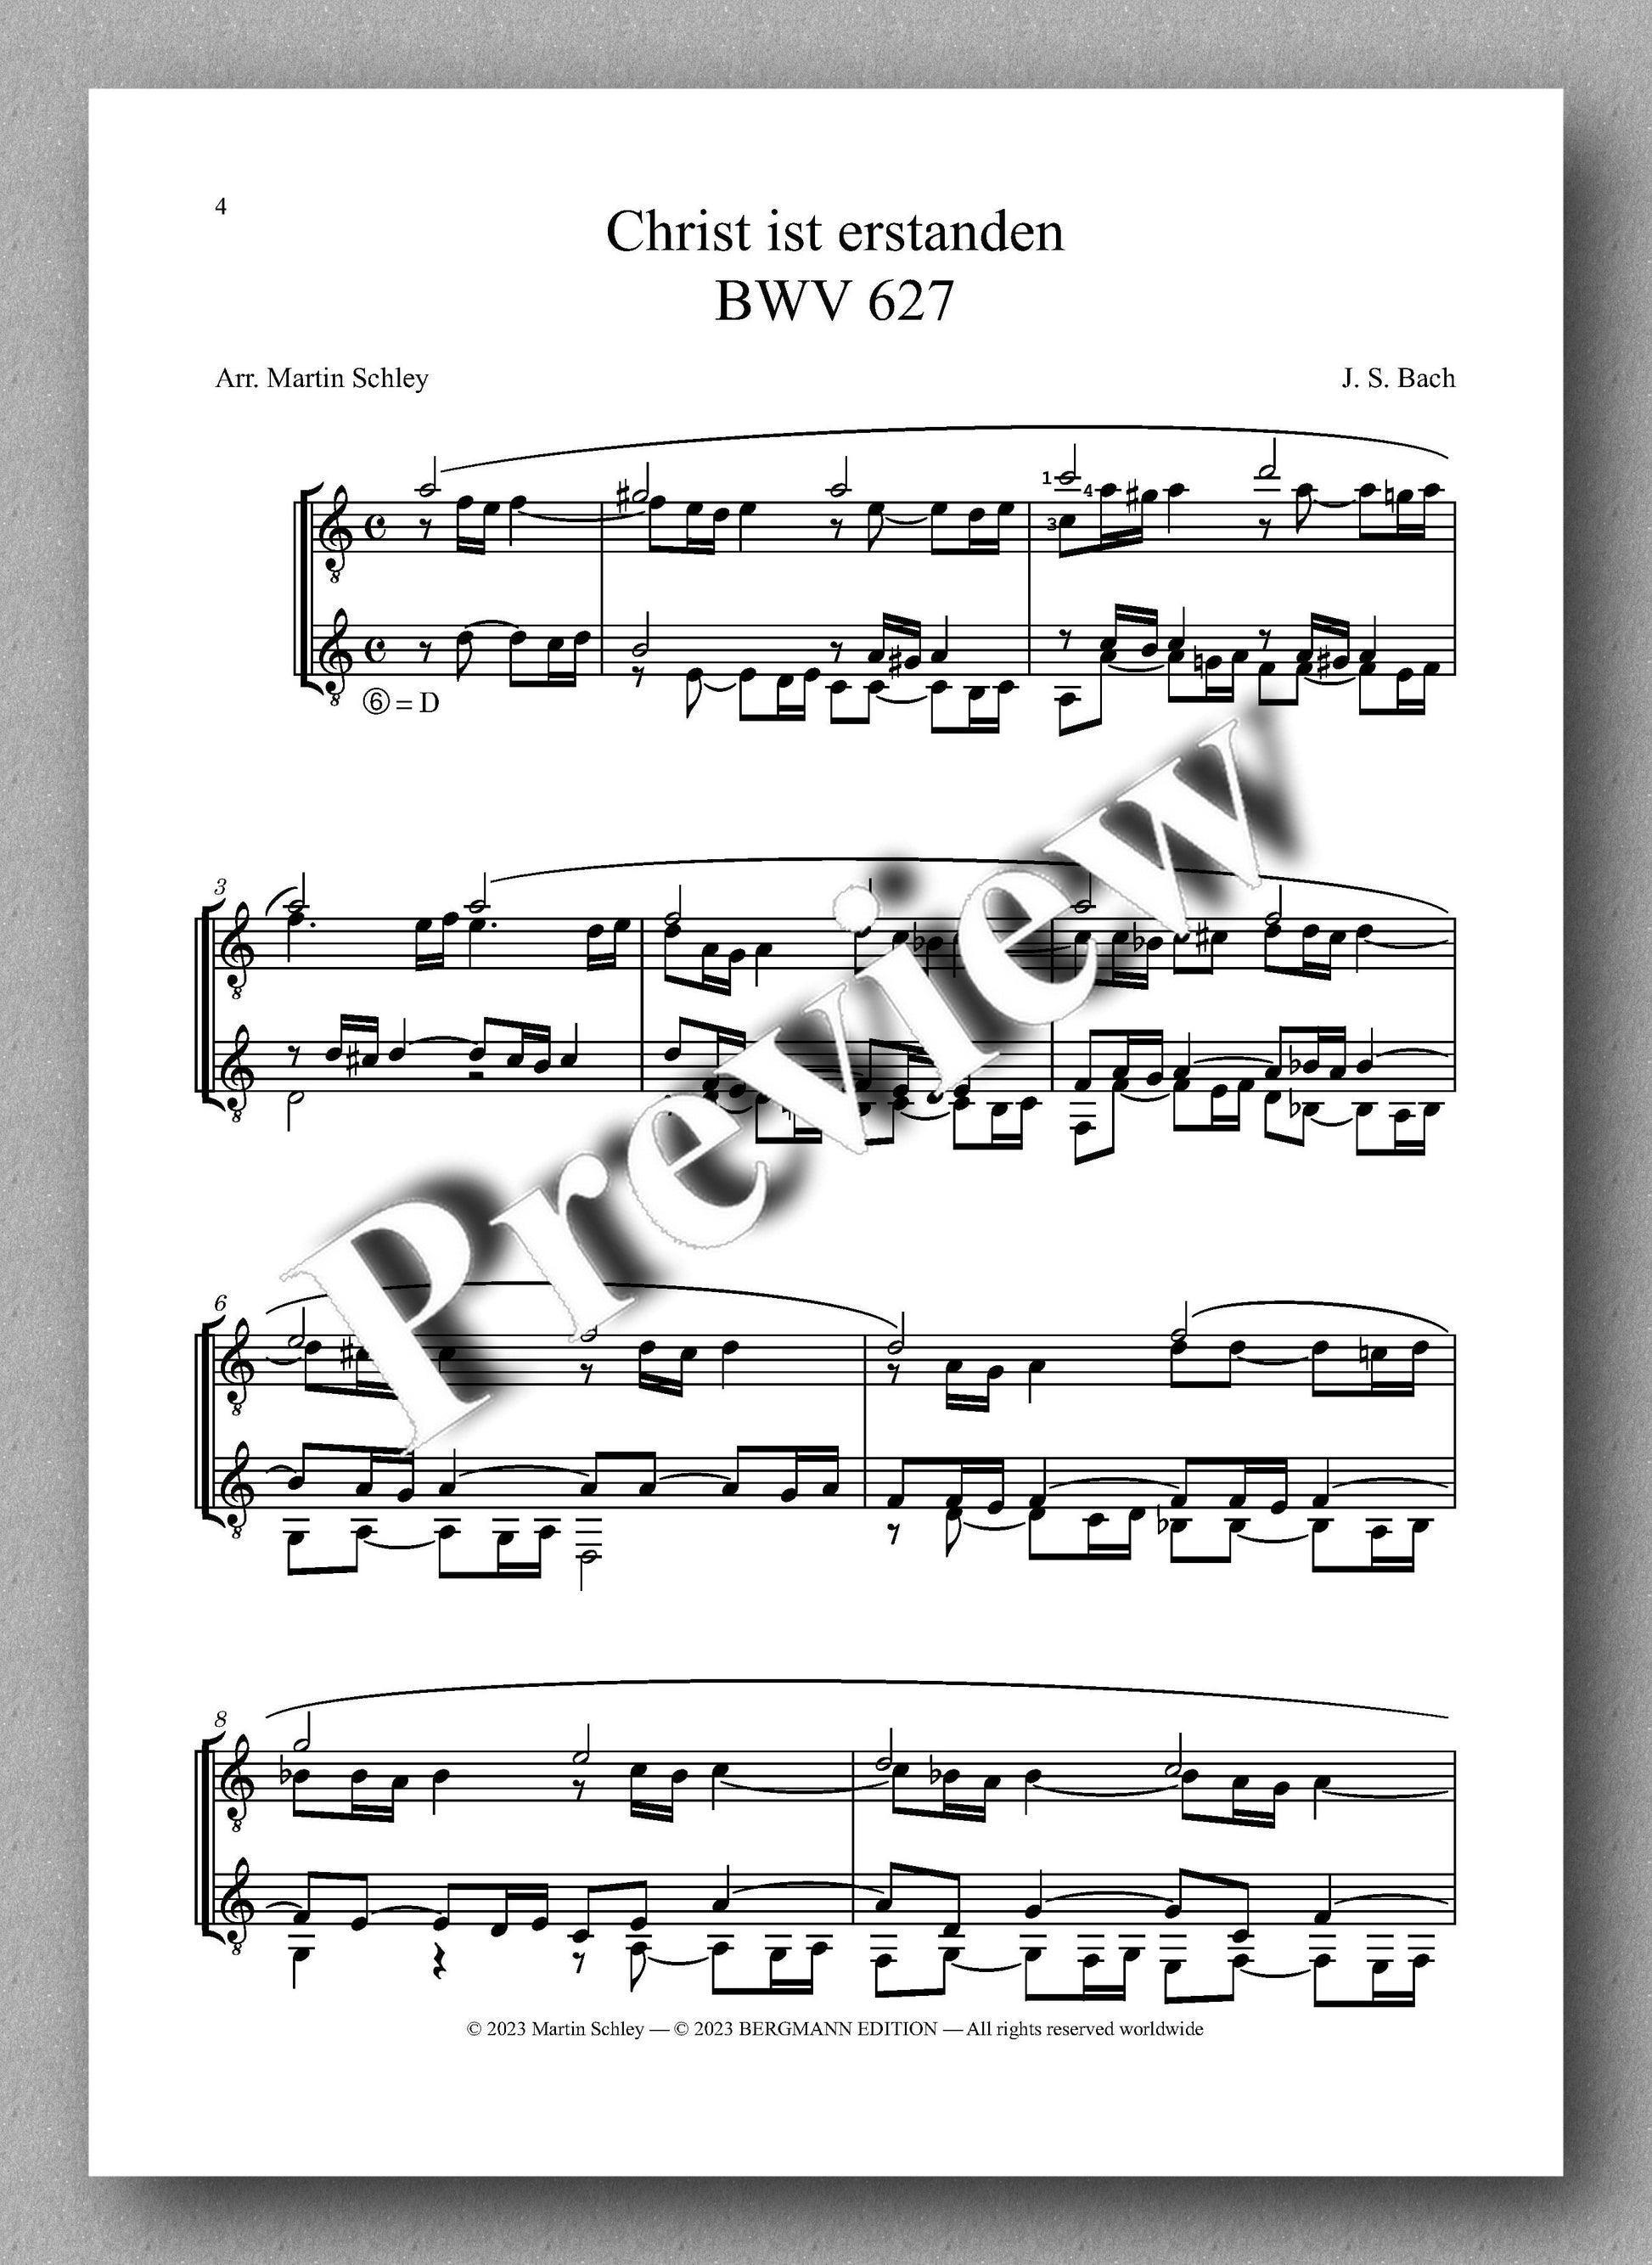 J.S. Bach, Christ ist erstanden, BWV 627 - Preview of the music score 1